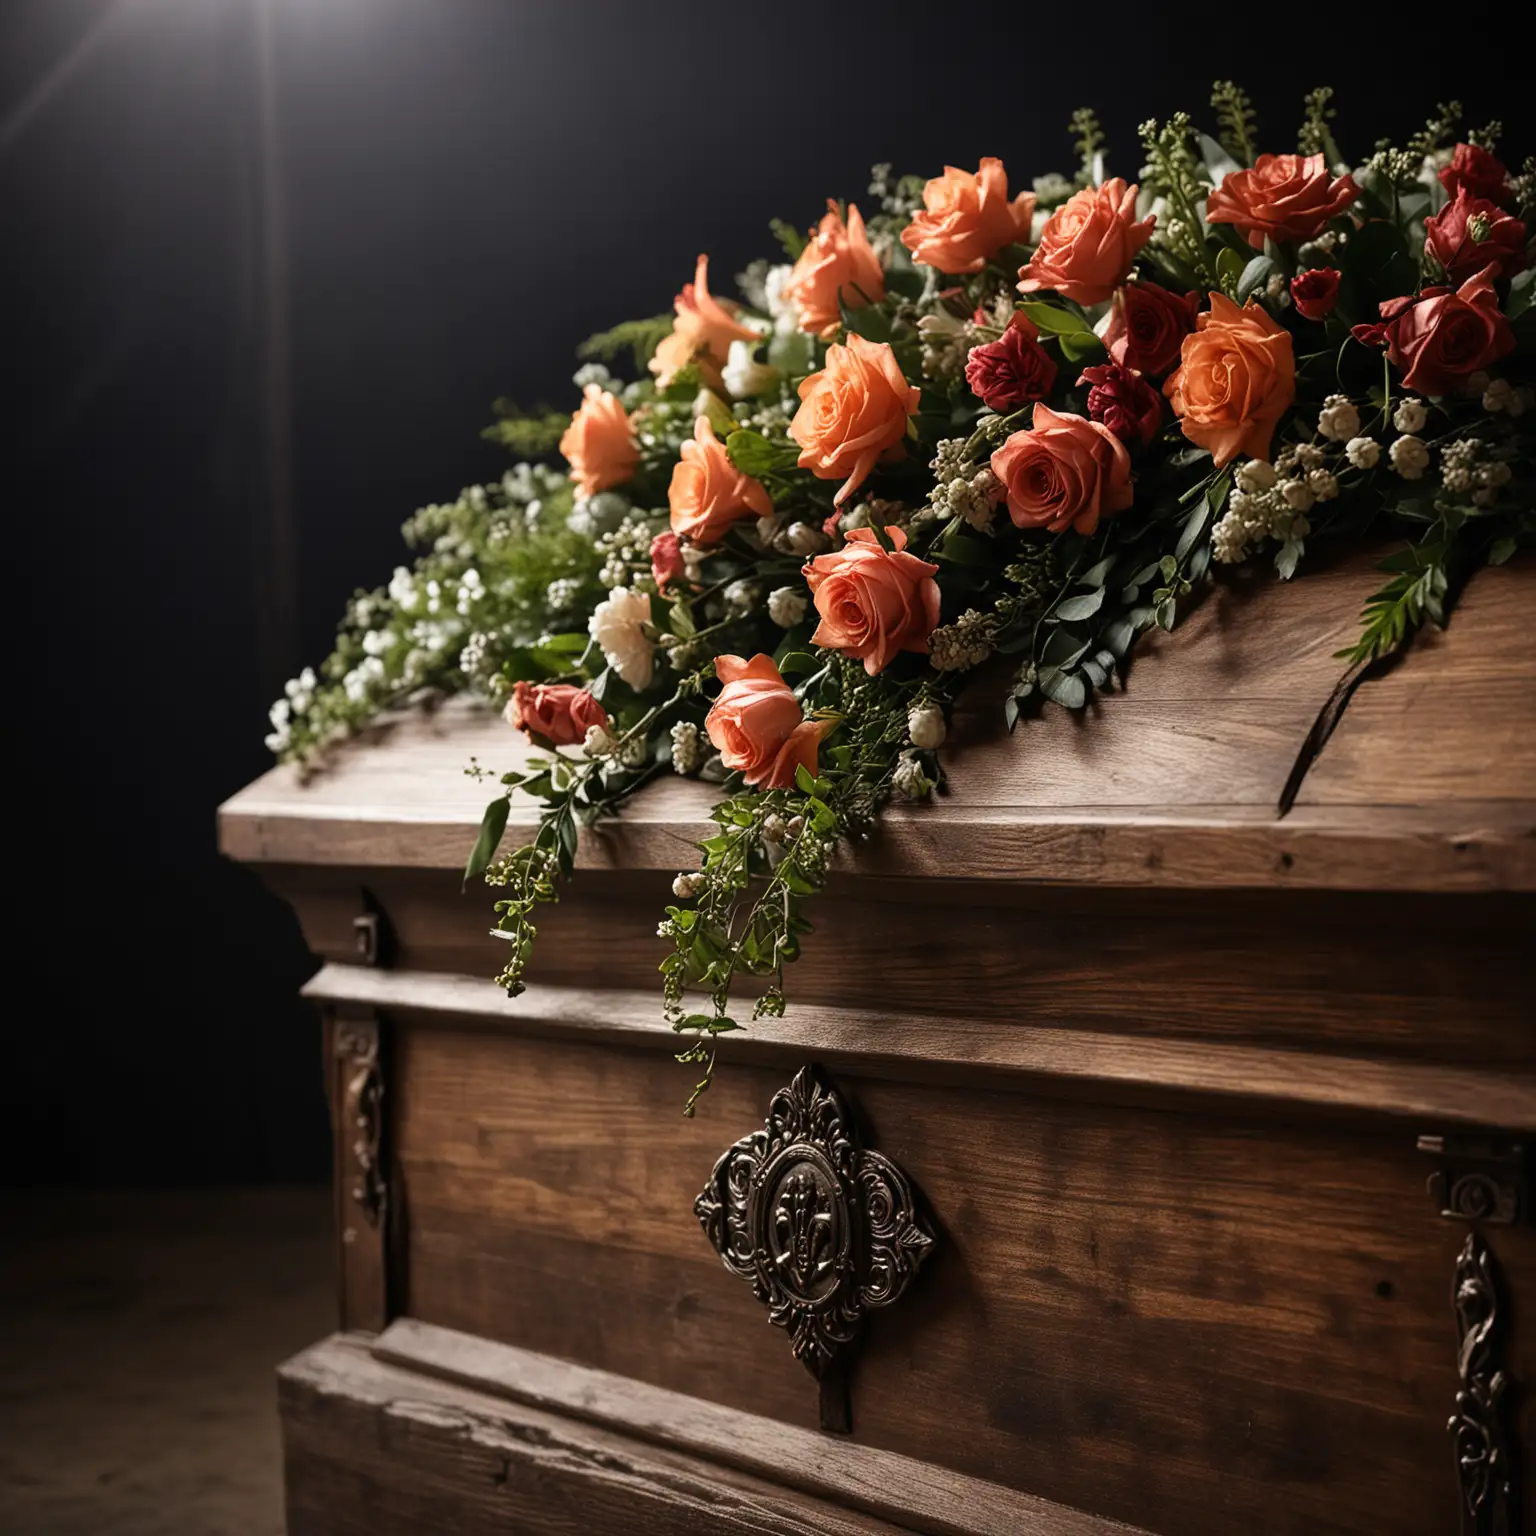 single dark bokeh light source, bouquet of callae on the coffin lid, fragment of modern coffin standing on a catafalque, coffin seen sideways at a sharp angle in perspective, solid blurred dark background